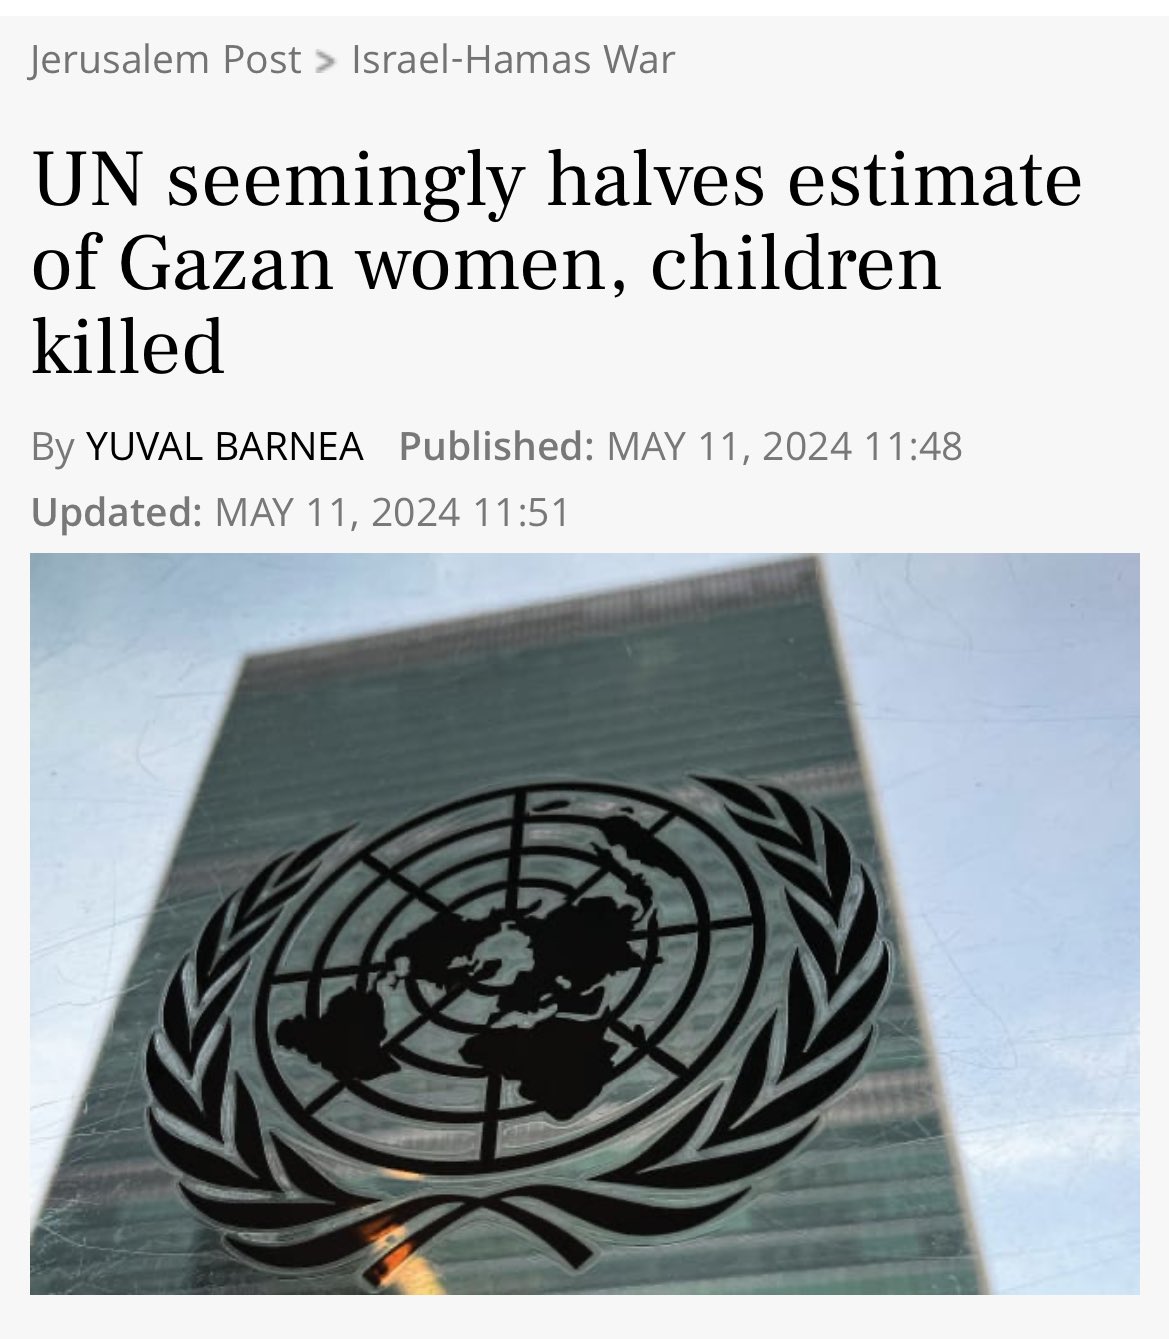 David Saranga on X: "On May 6, the UN published data showing that 34,735 people had reportedly been killed in Gaza, including over 9,500 women and over 14,500 children. On May 8,